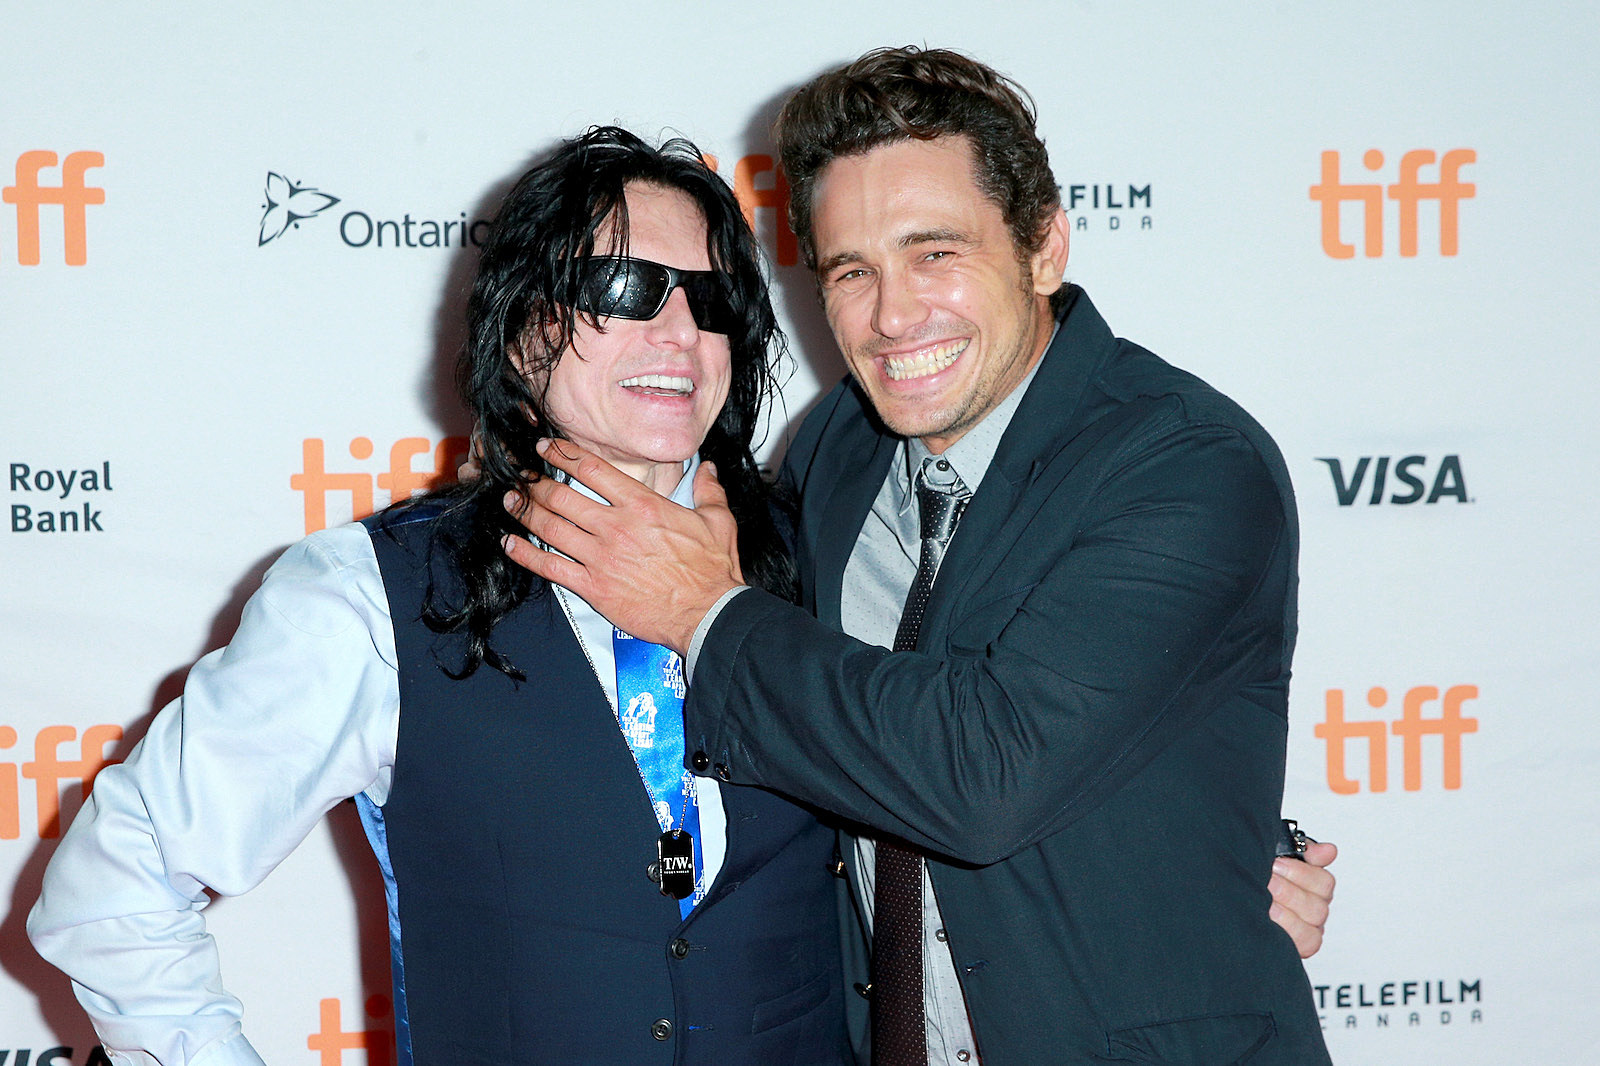 The Room's Tommy Wiseau Wants to Direct 'Star Wars'